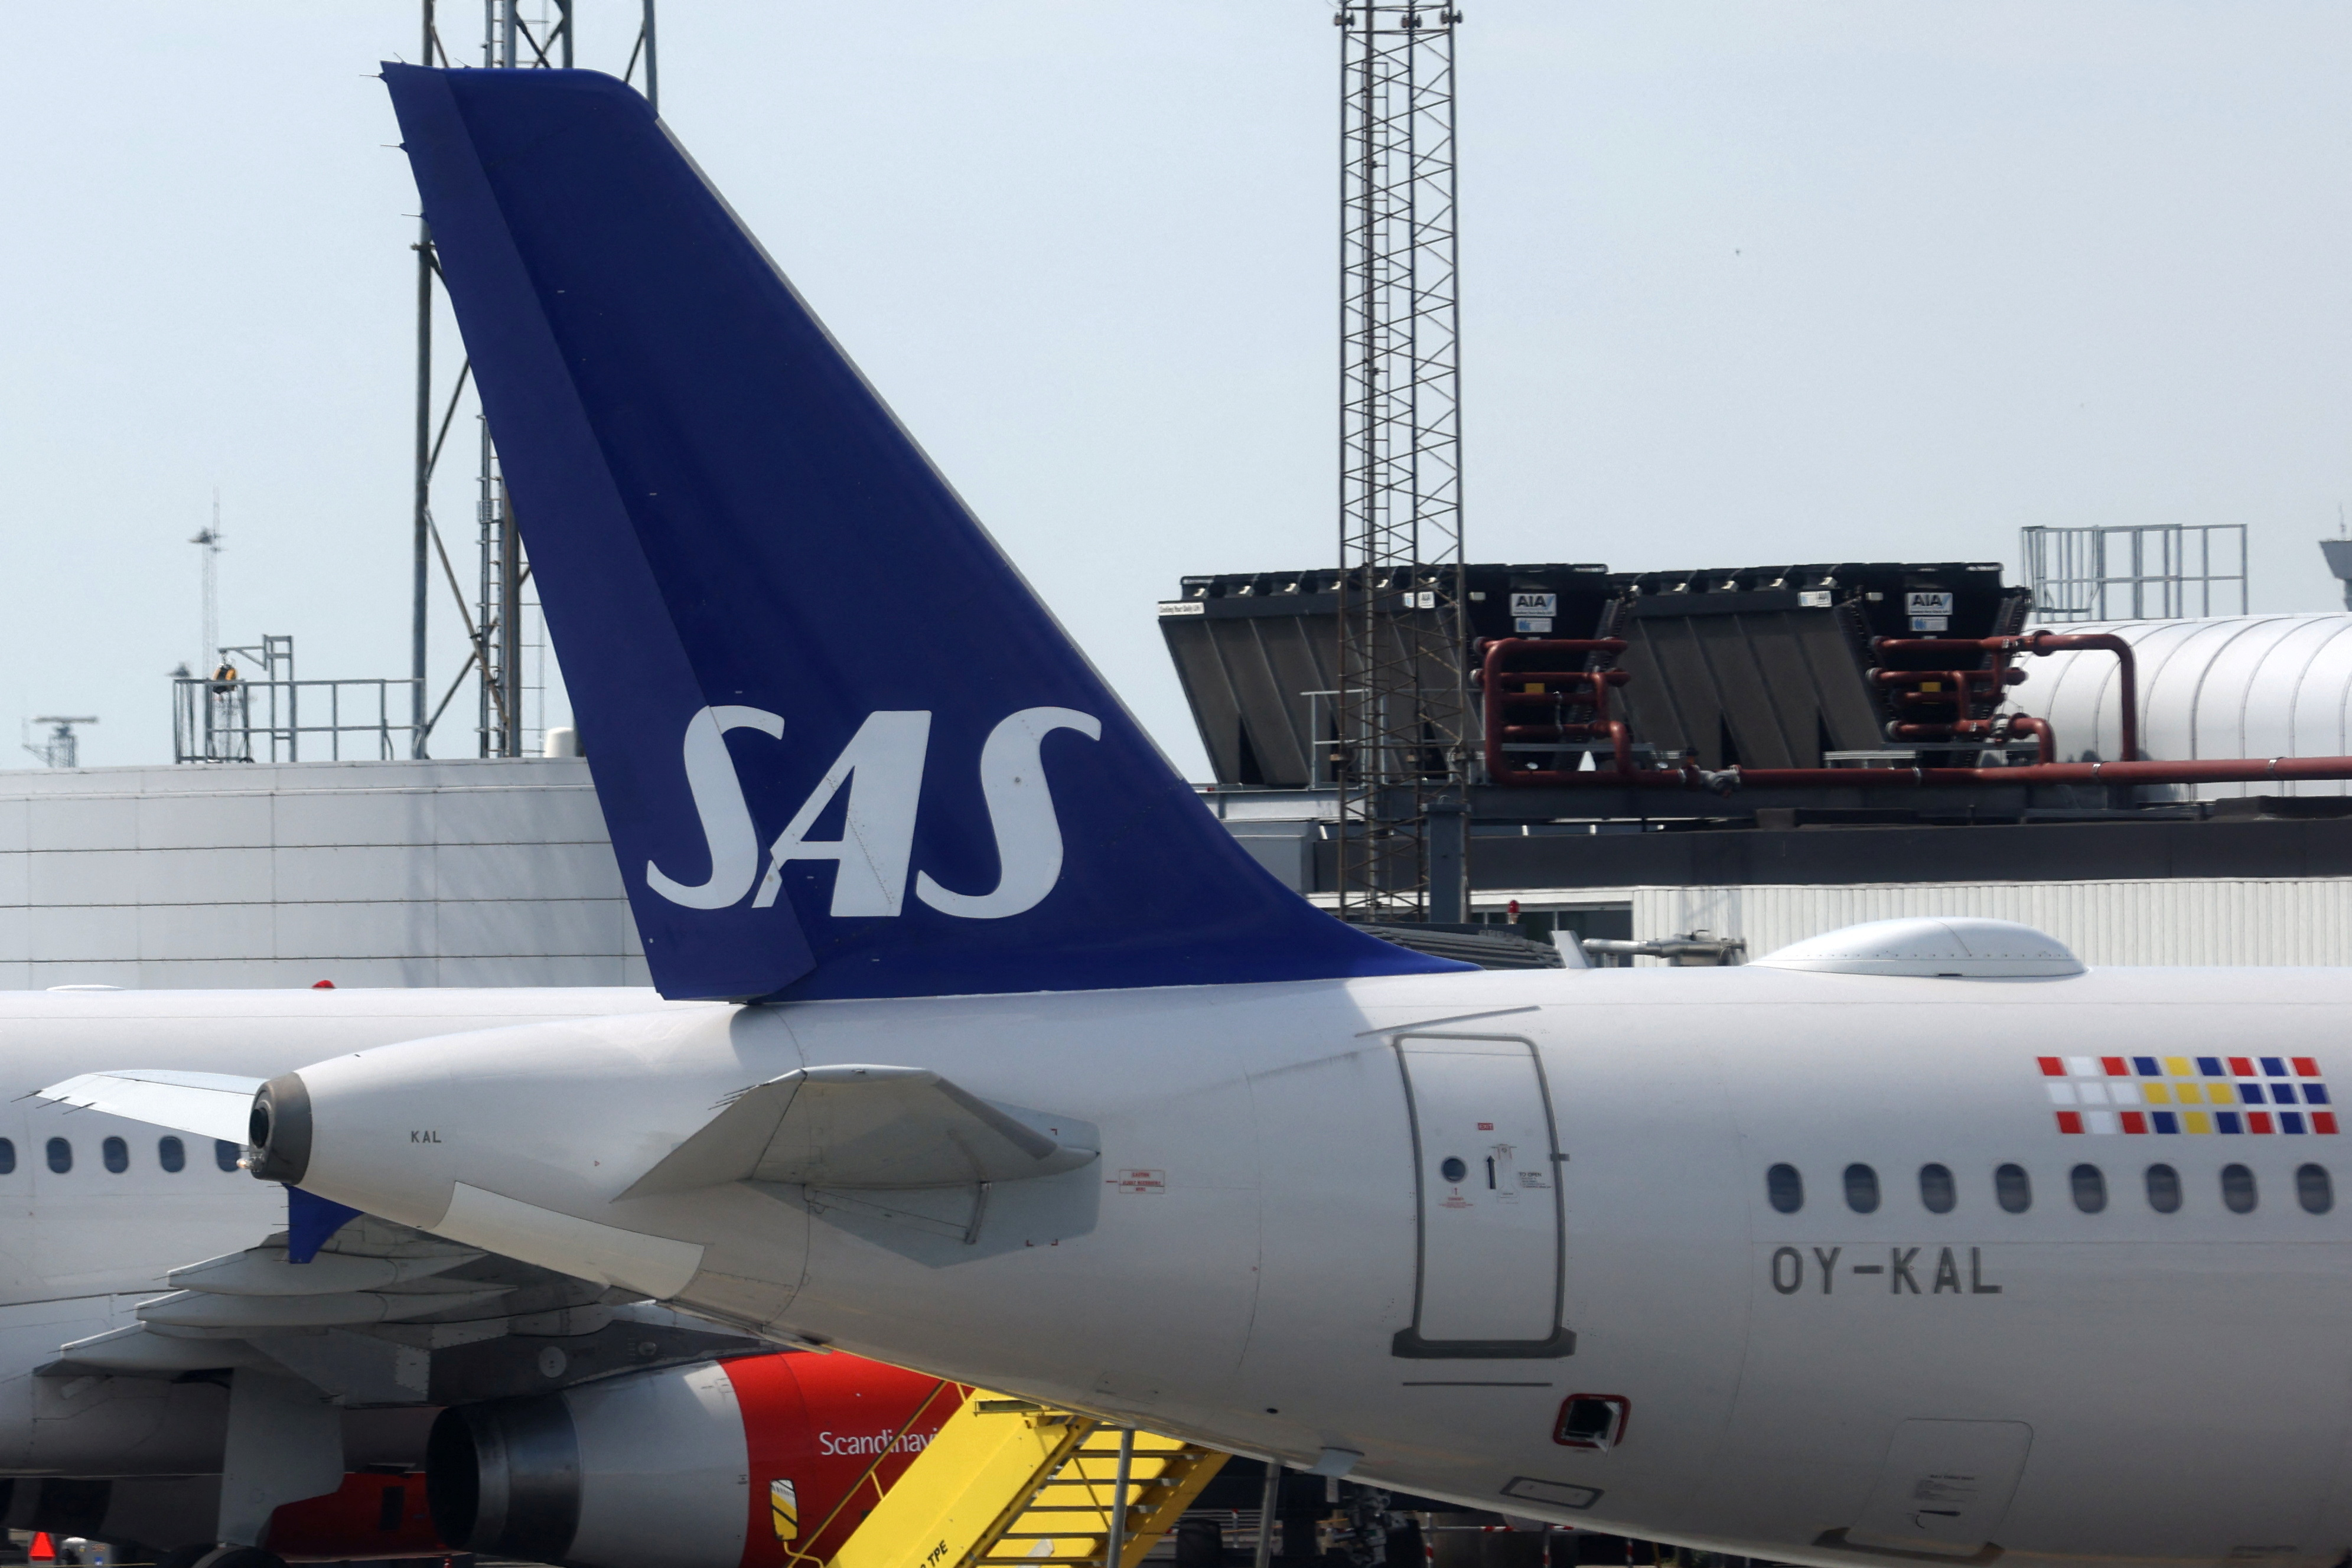 The tail fin of a Scandinavian Airlines (SAS) airplane parked on the tarmac at Copenhagen Airport Kastrup in Copenhagen